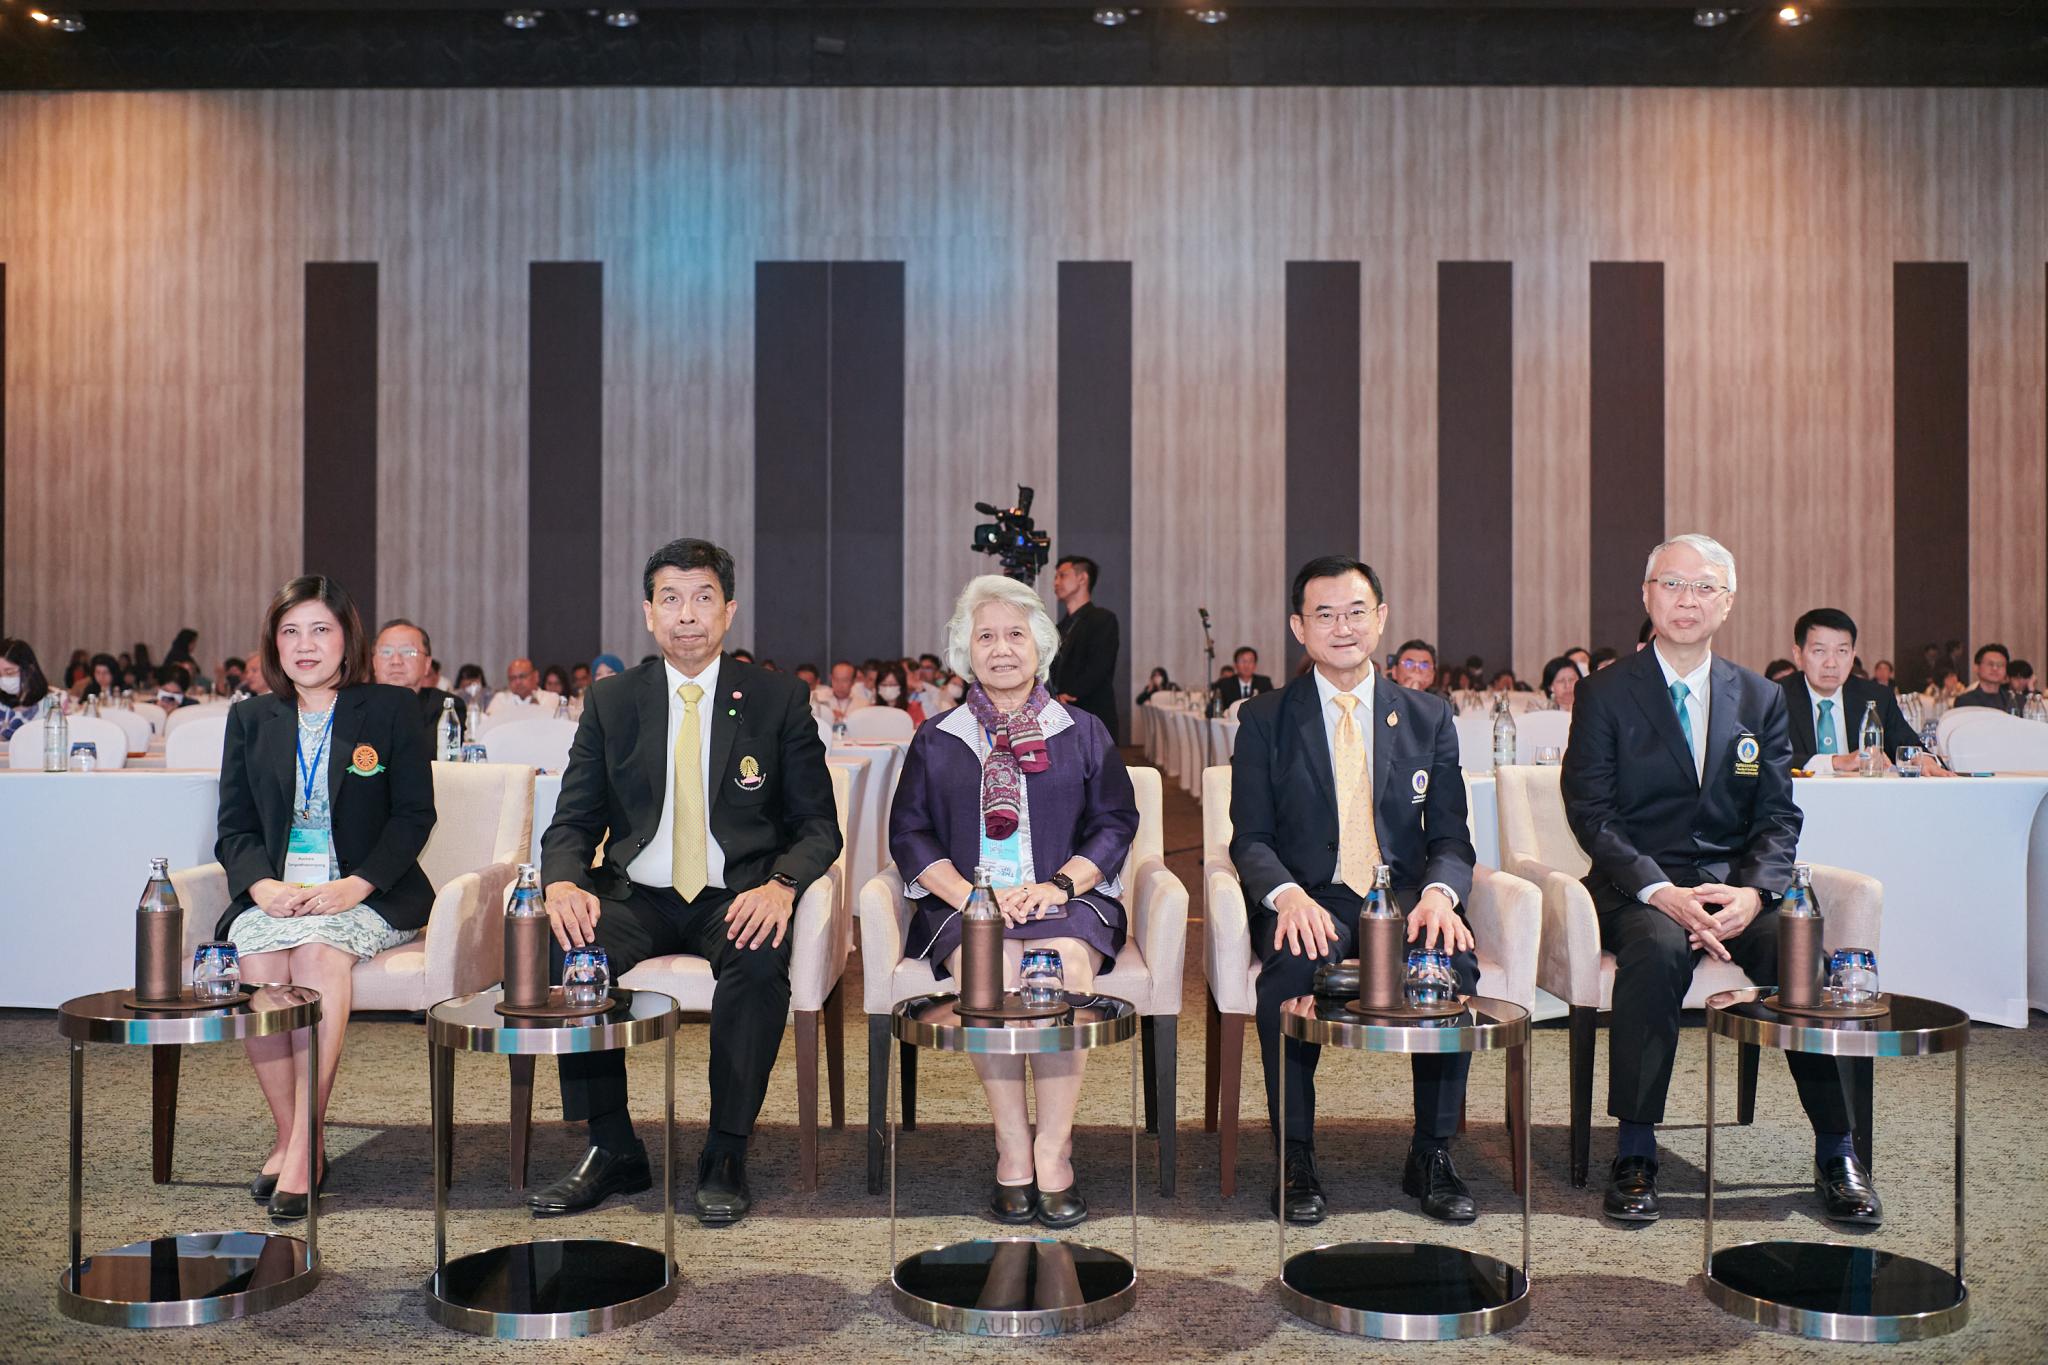 The 23rd Thai Medical Education Conference 2024